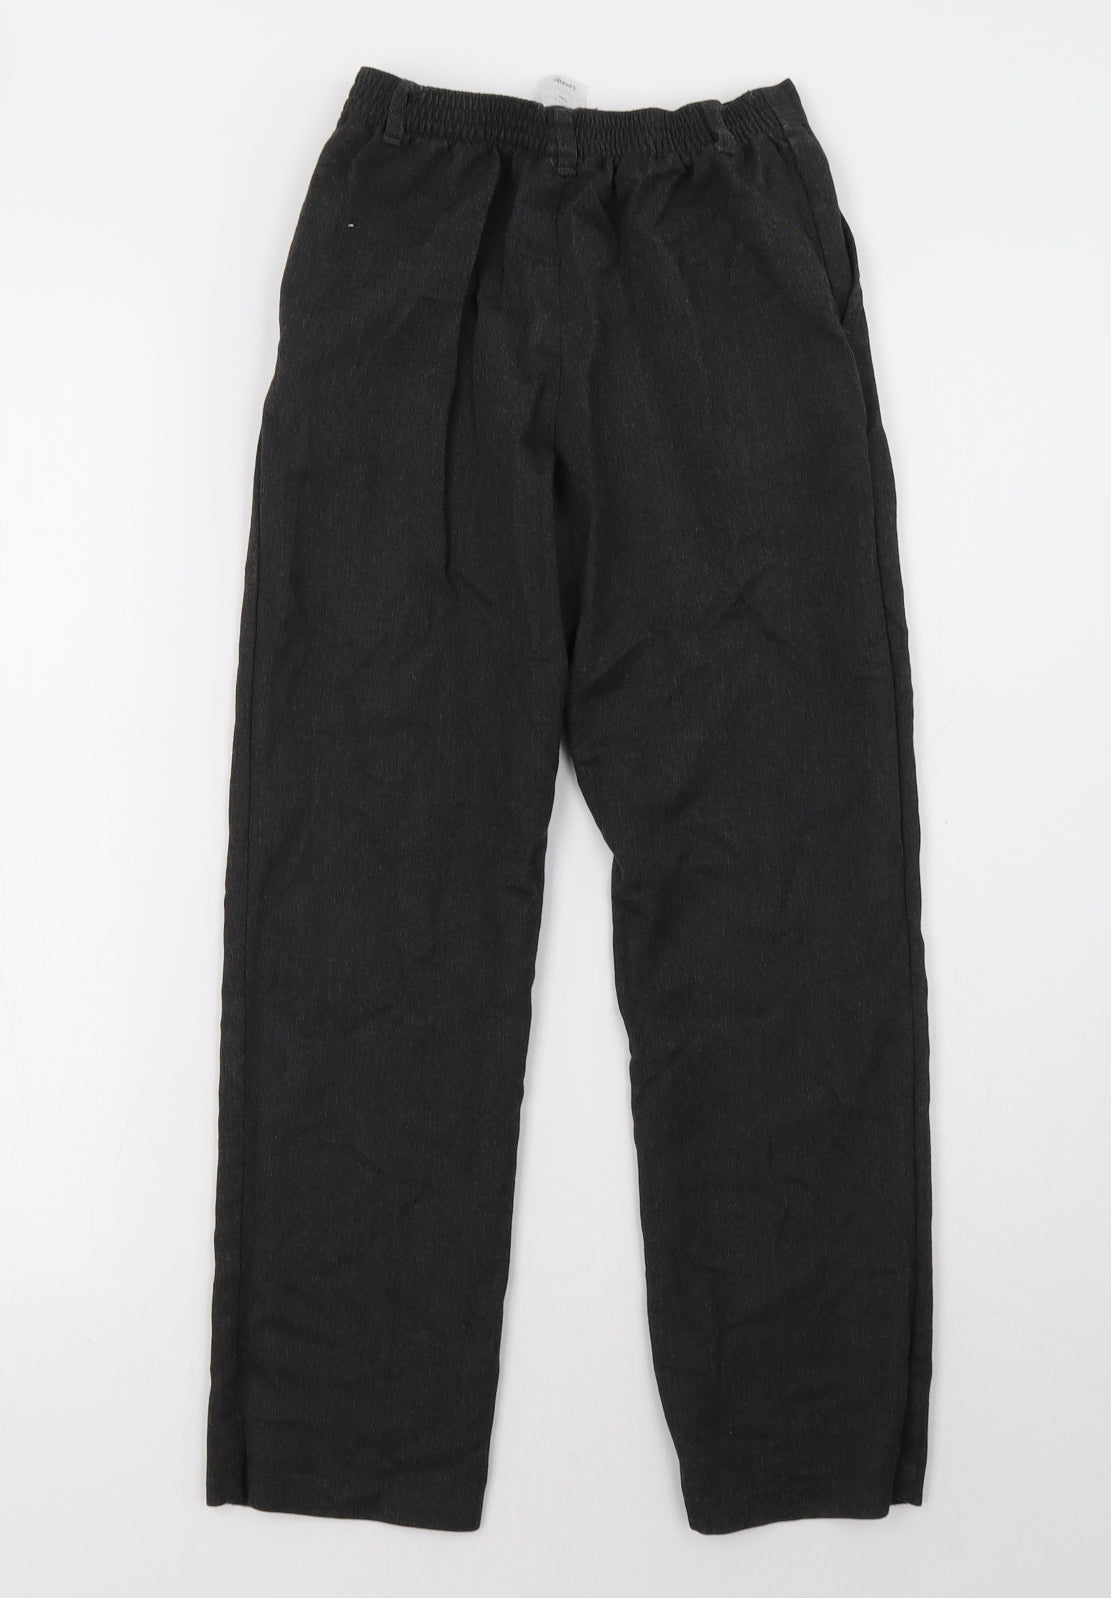 George Boys Grey    Trousers Size 9 Years